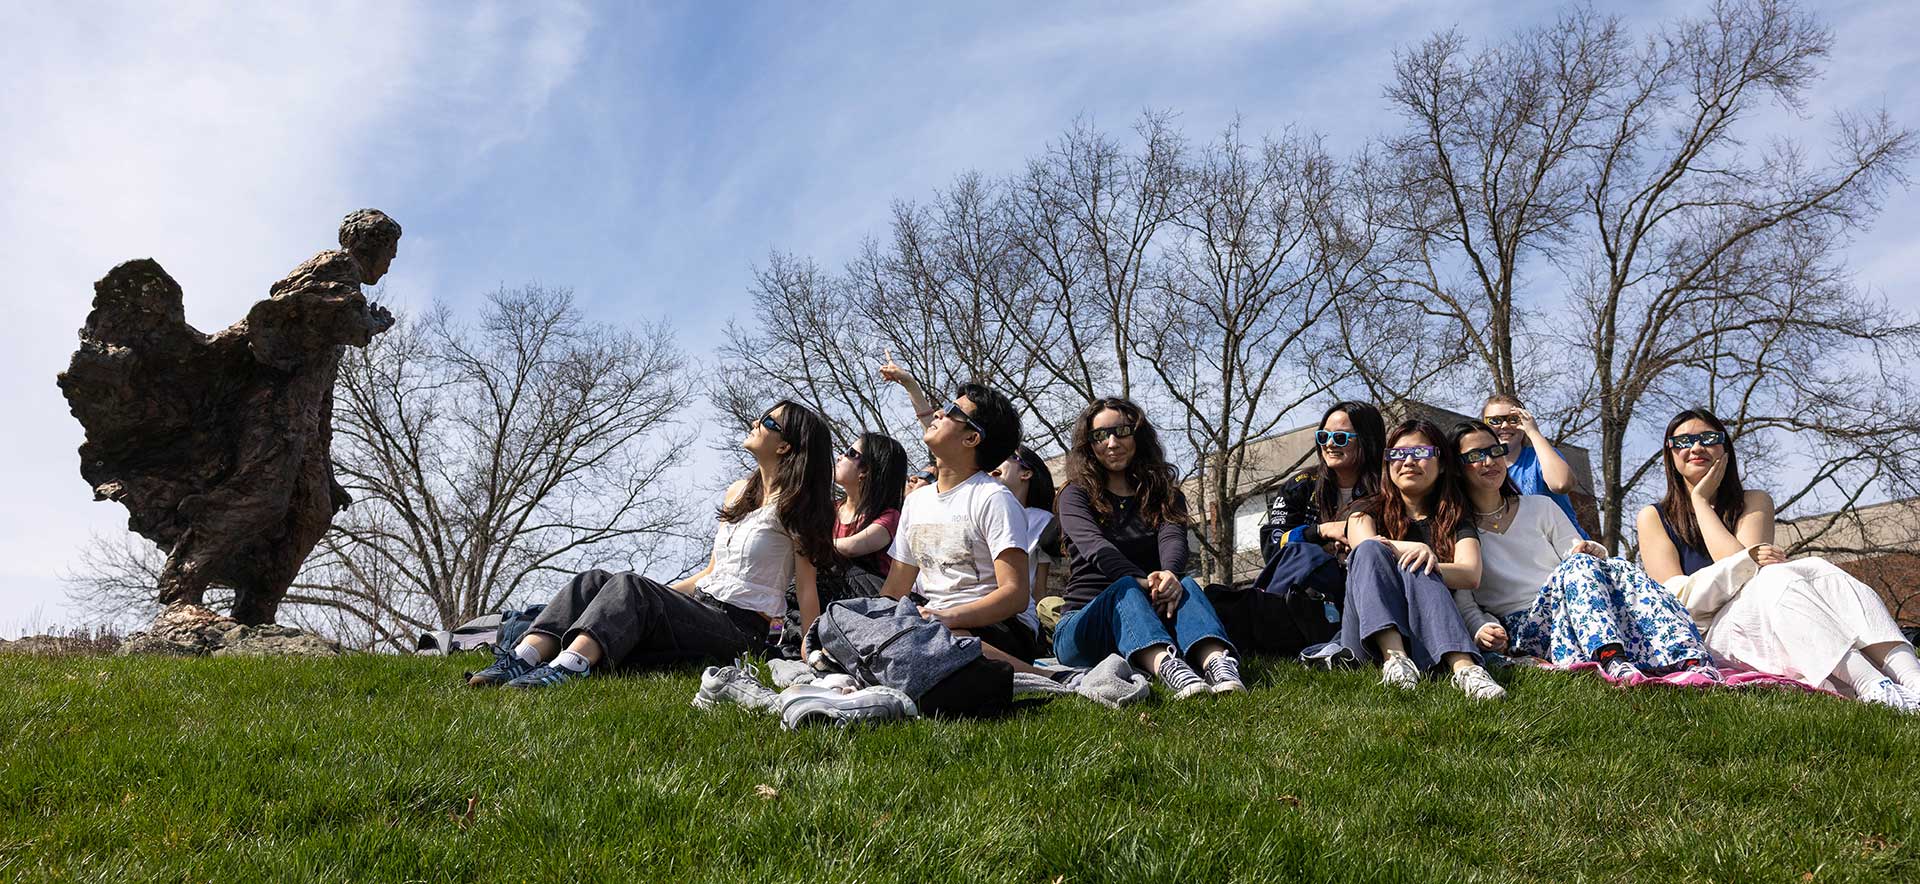 A group of students sit on the grass wearing eclipse viewing glasses and looking at the sky